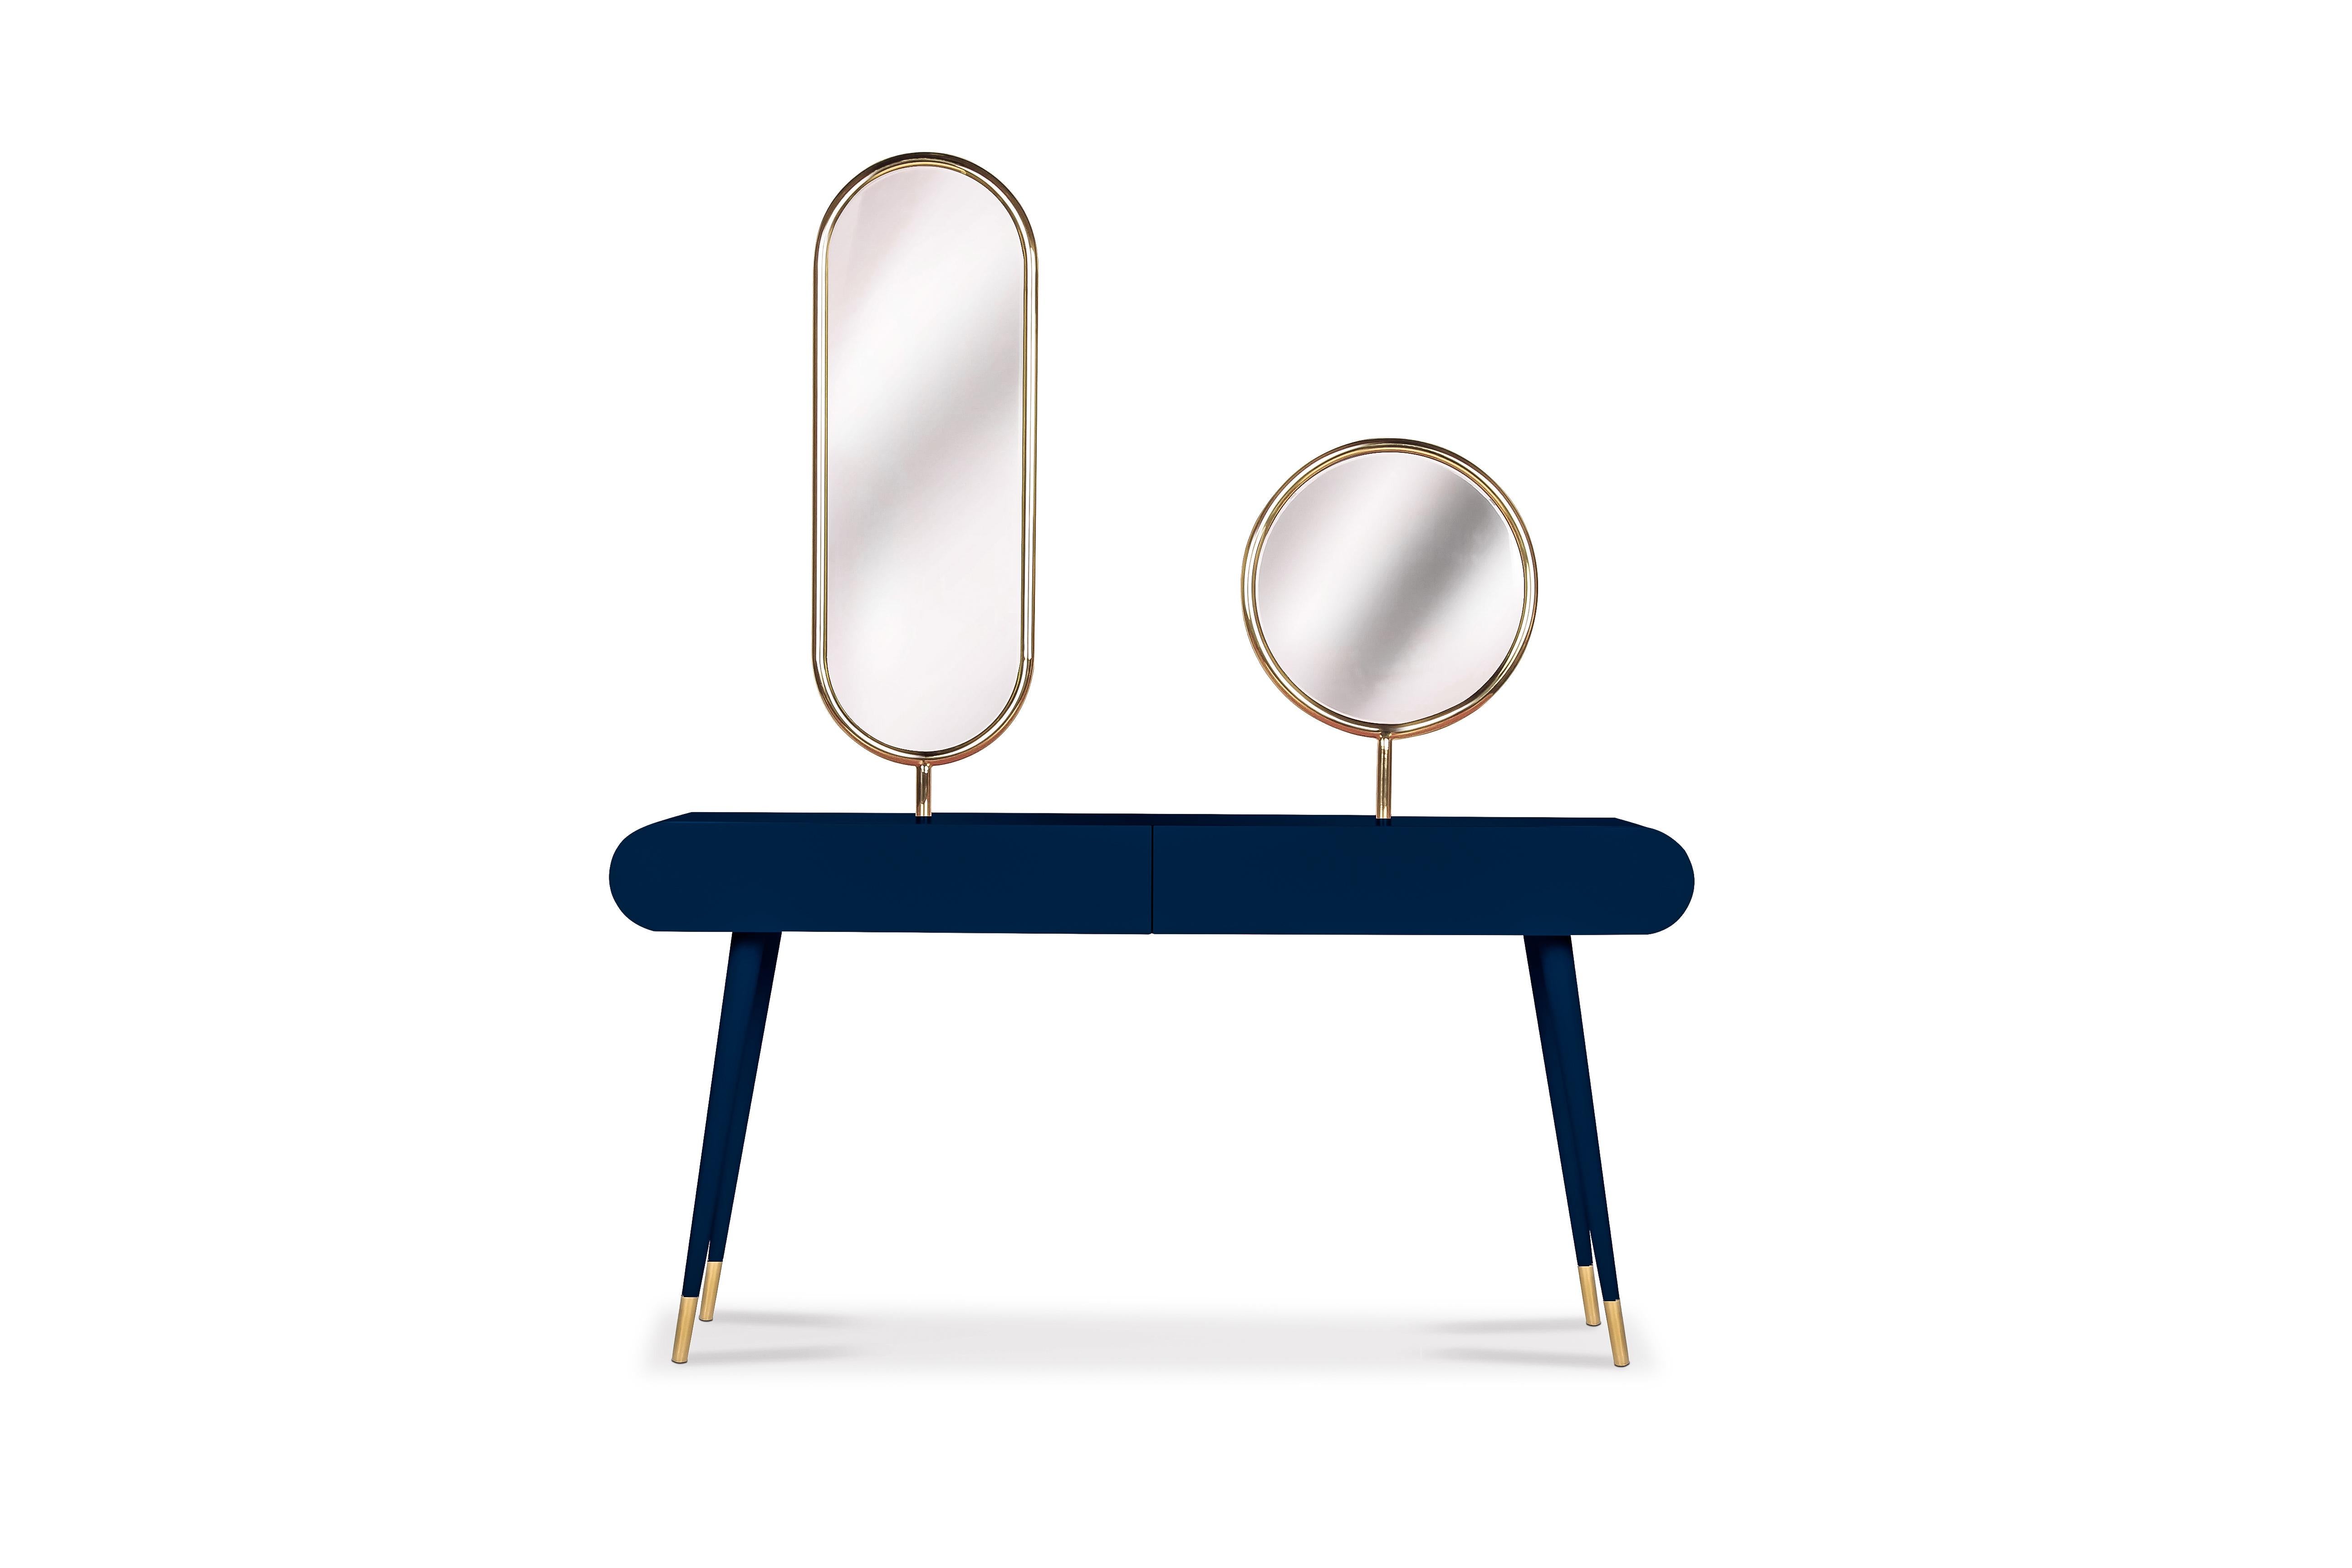 Pearl Grace dressing table, Royal Stranger
Dimensions: 182 x 160 x 45 cm
Materials: Lacquered wood, brass
Available in different colors: Pink and Royal red, mint and Royal green, light blue and Royal, blue
Royal Stranger is an exclusive furniture